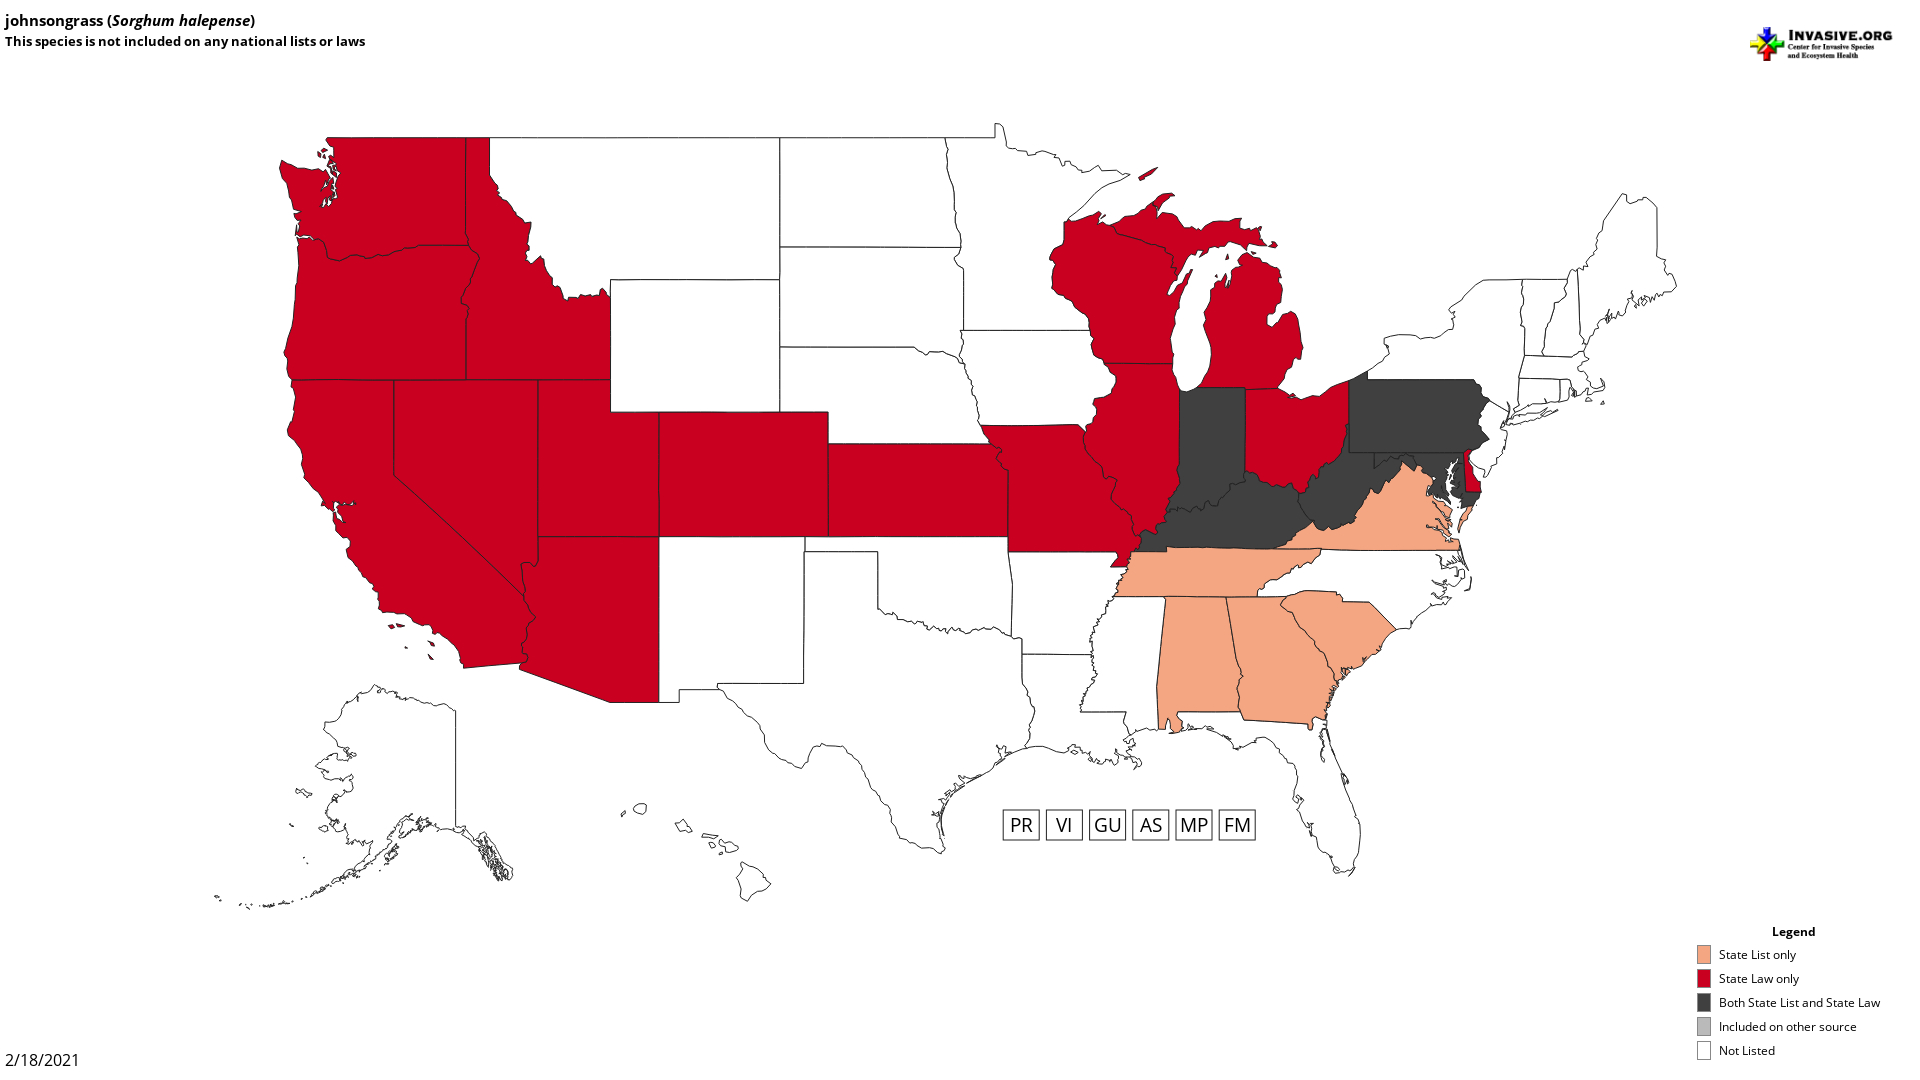 Map showing the United States with states colored to indicate whether Johnsongrass is listed as invasive. Johnsongrass is considered invasive in California, Washington, Oregon, Idaho, Nevada, Utah, Arizona, Colorado, Kansas, Missuouri, Illinois, Wisconsin, Michigan, Ohio, and Delaware by State Law only (shaded red). It is considered invasive in Indiana, Kentucky, West Virginia, Pennsylvania, and Maryland by both state law and state list (states shaded dark gray). It is considered invasive in Virginia, Tennessee, Alabama, Georgia, and South Carolina by state list only (states shaded pink). In other states, it is not listed (states not shaded).